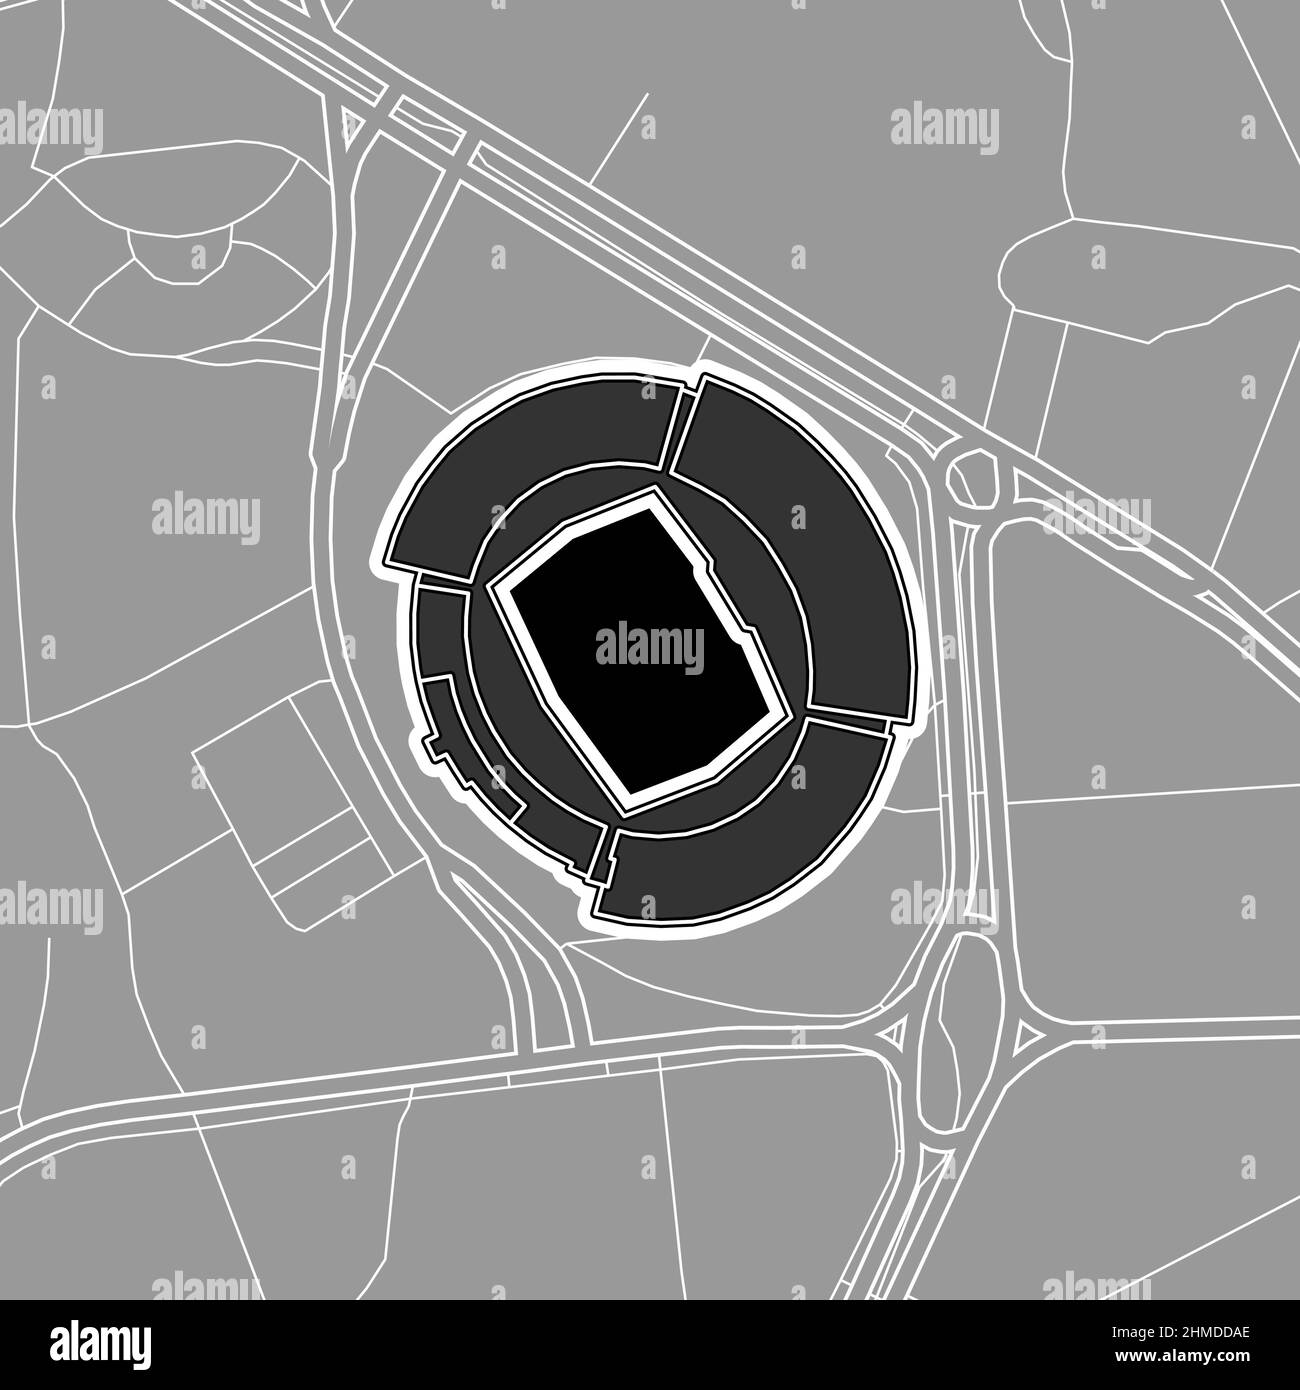 Montevideo, Baseball MLB Stadium, outline vector map. The baseball statium map was drawn with white areas and lines for main roads, side roads. Stock Vector